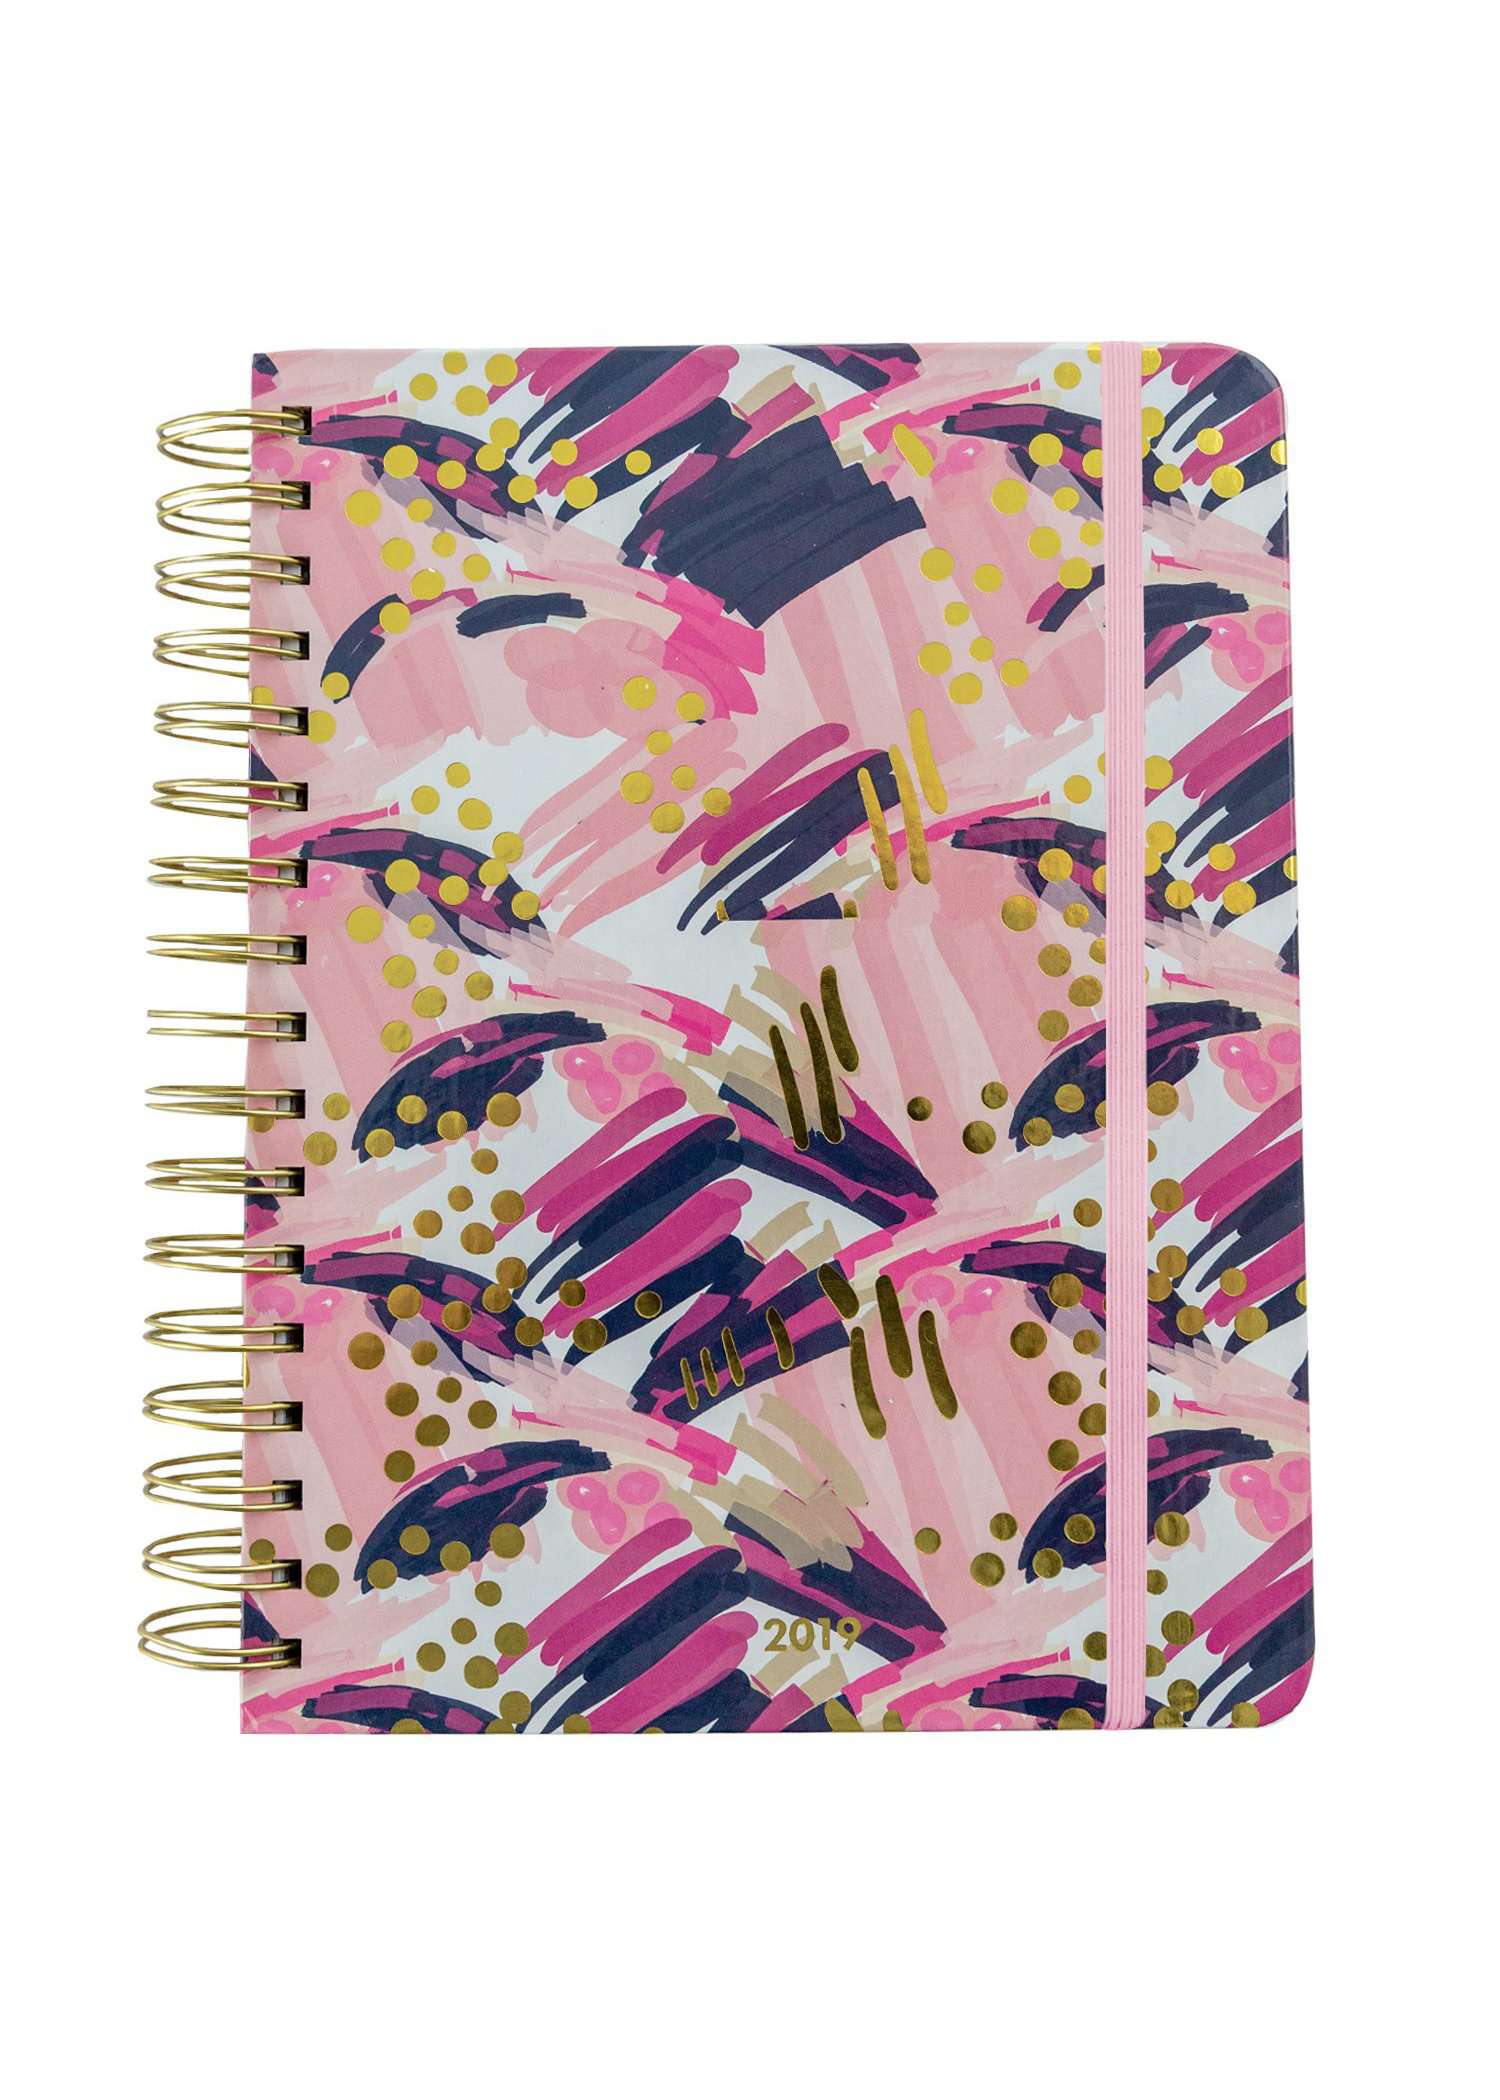 Pink, purple and gold foil Hardcover, 12 month spiral Life Planner runs January 2019 through December 2019, contains scripture verses